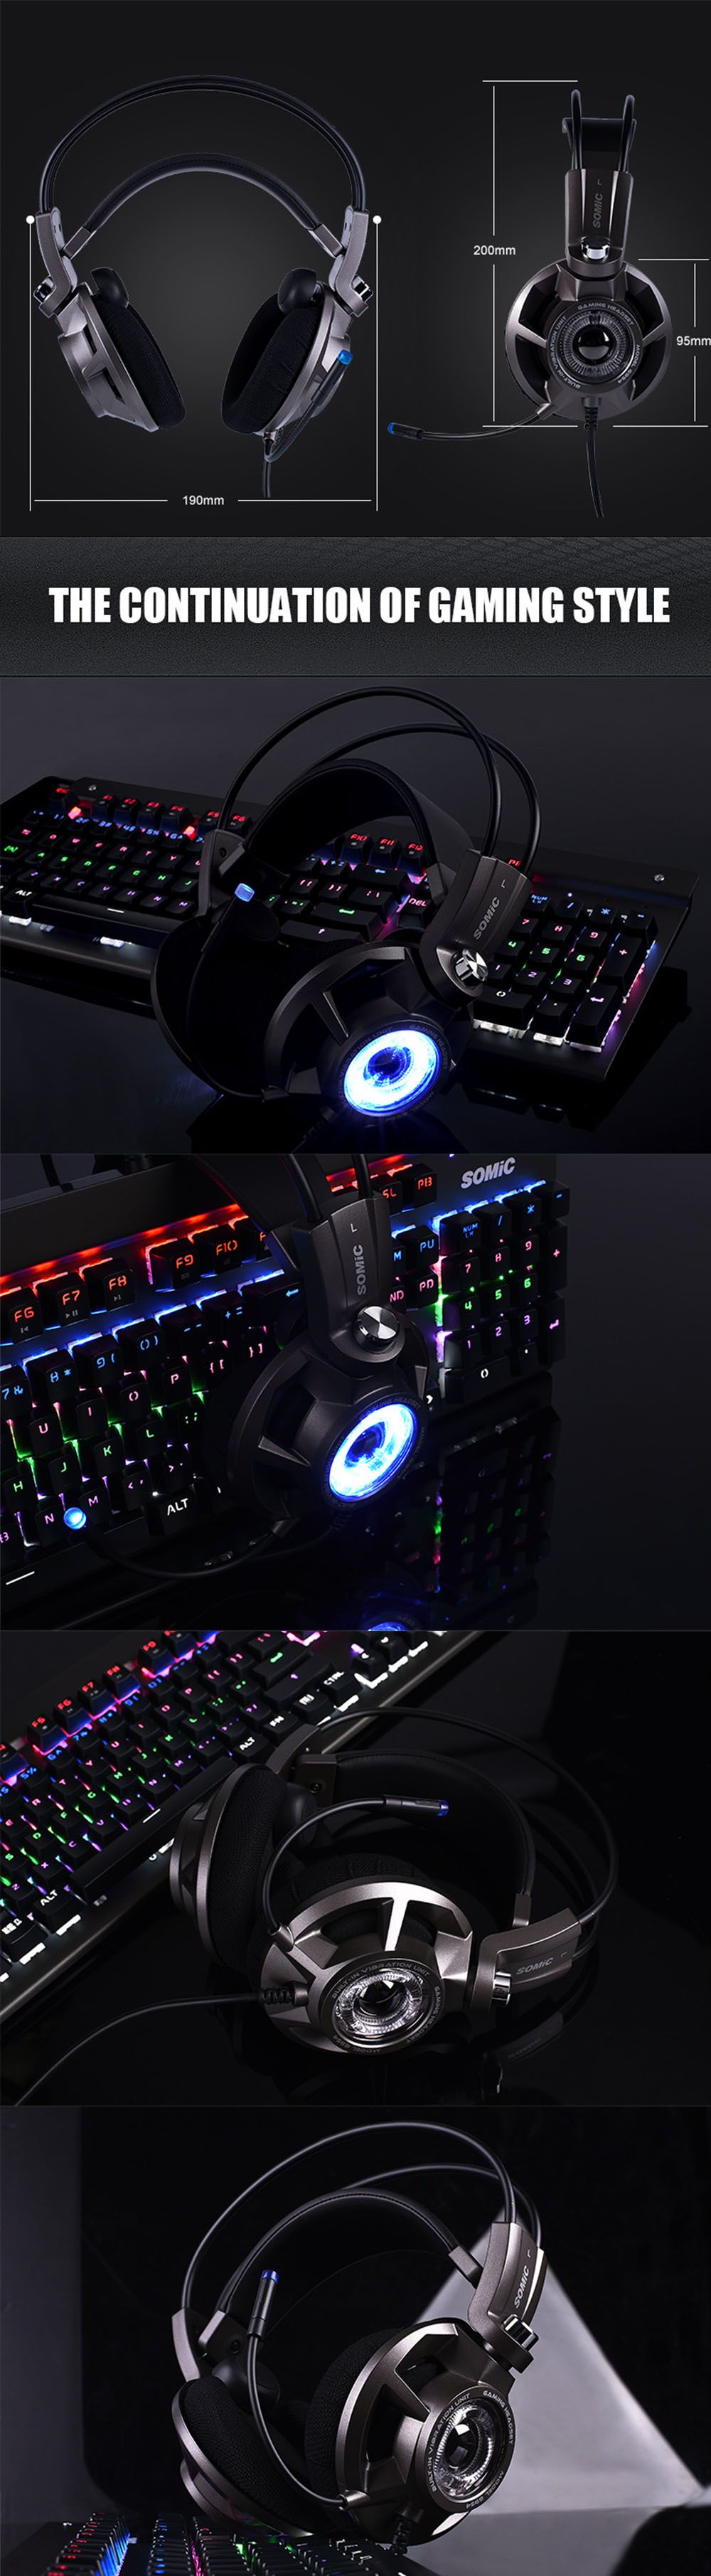 SOMiC-G954-Virtual-71-Surround-USB-Gaming-Luminous-Headphone-Headset-With-Microphone-for-Computer-Pr-1560387